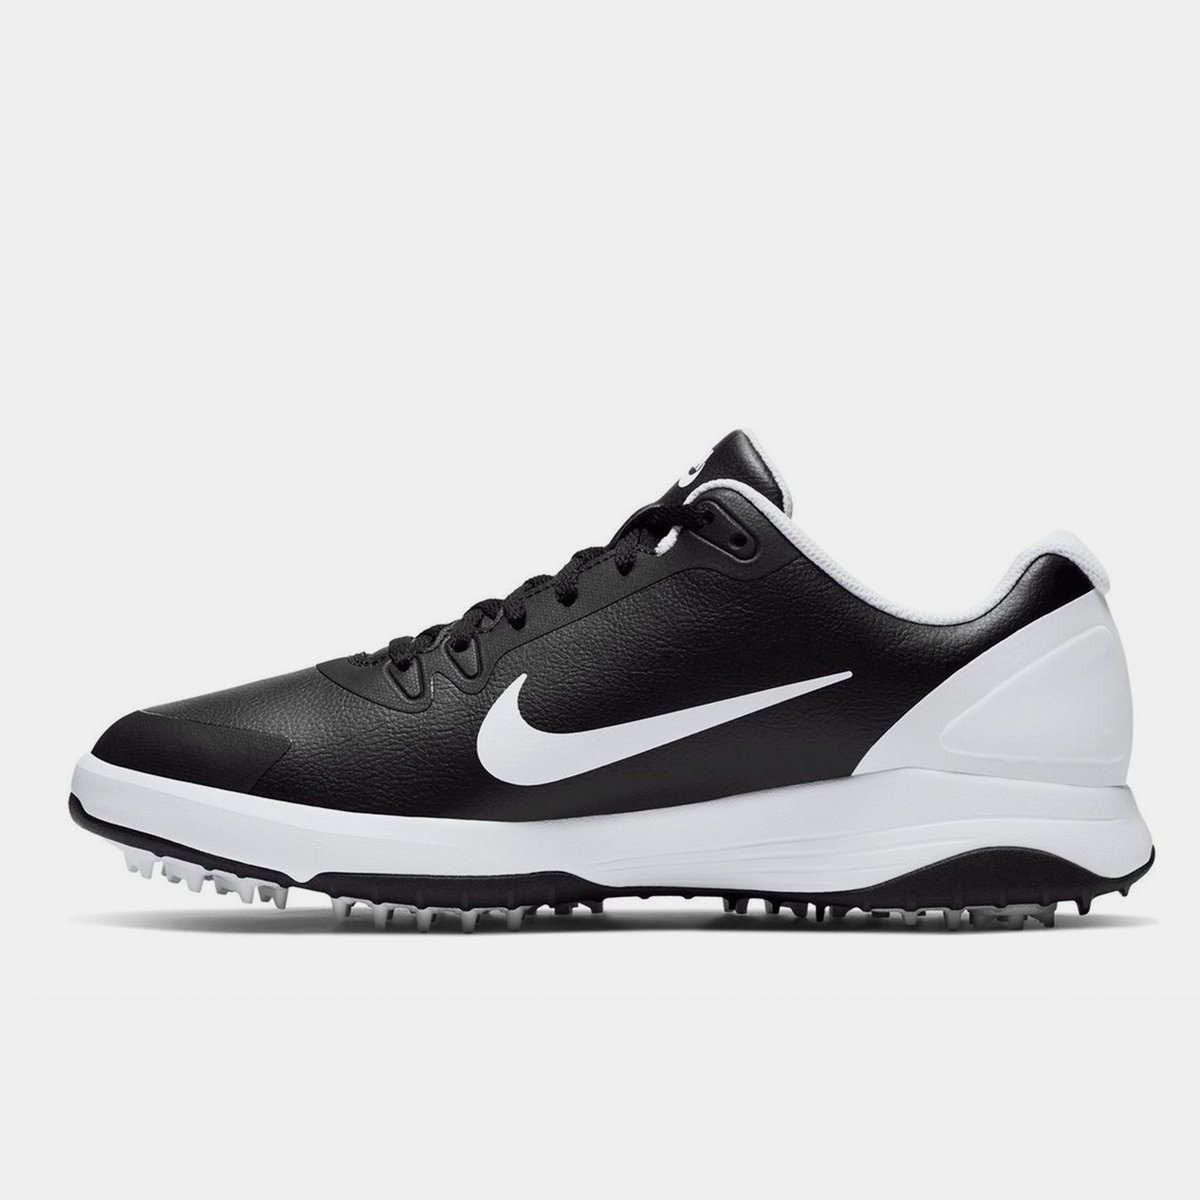 All Golf Shoes - Lovell Sports